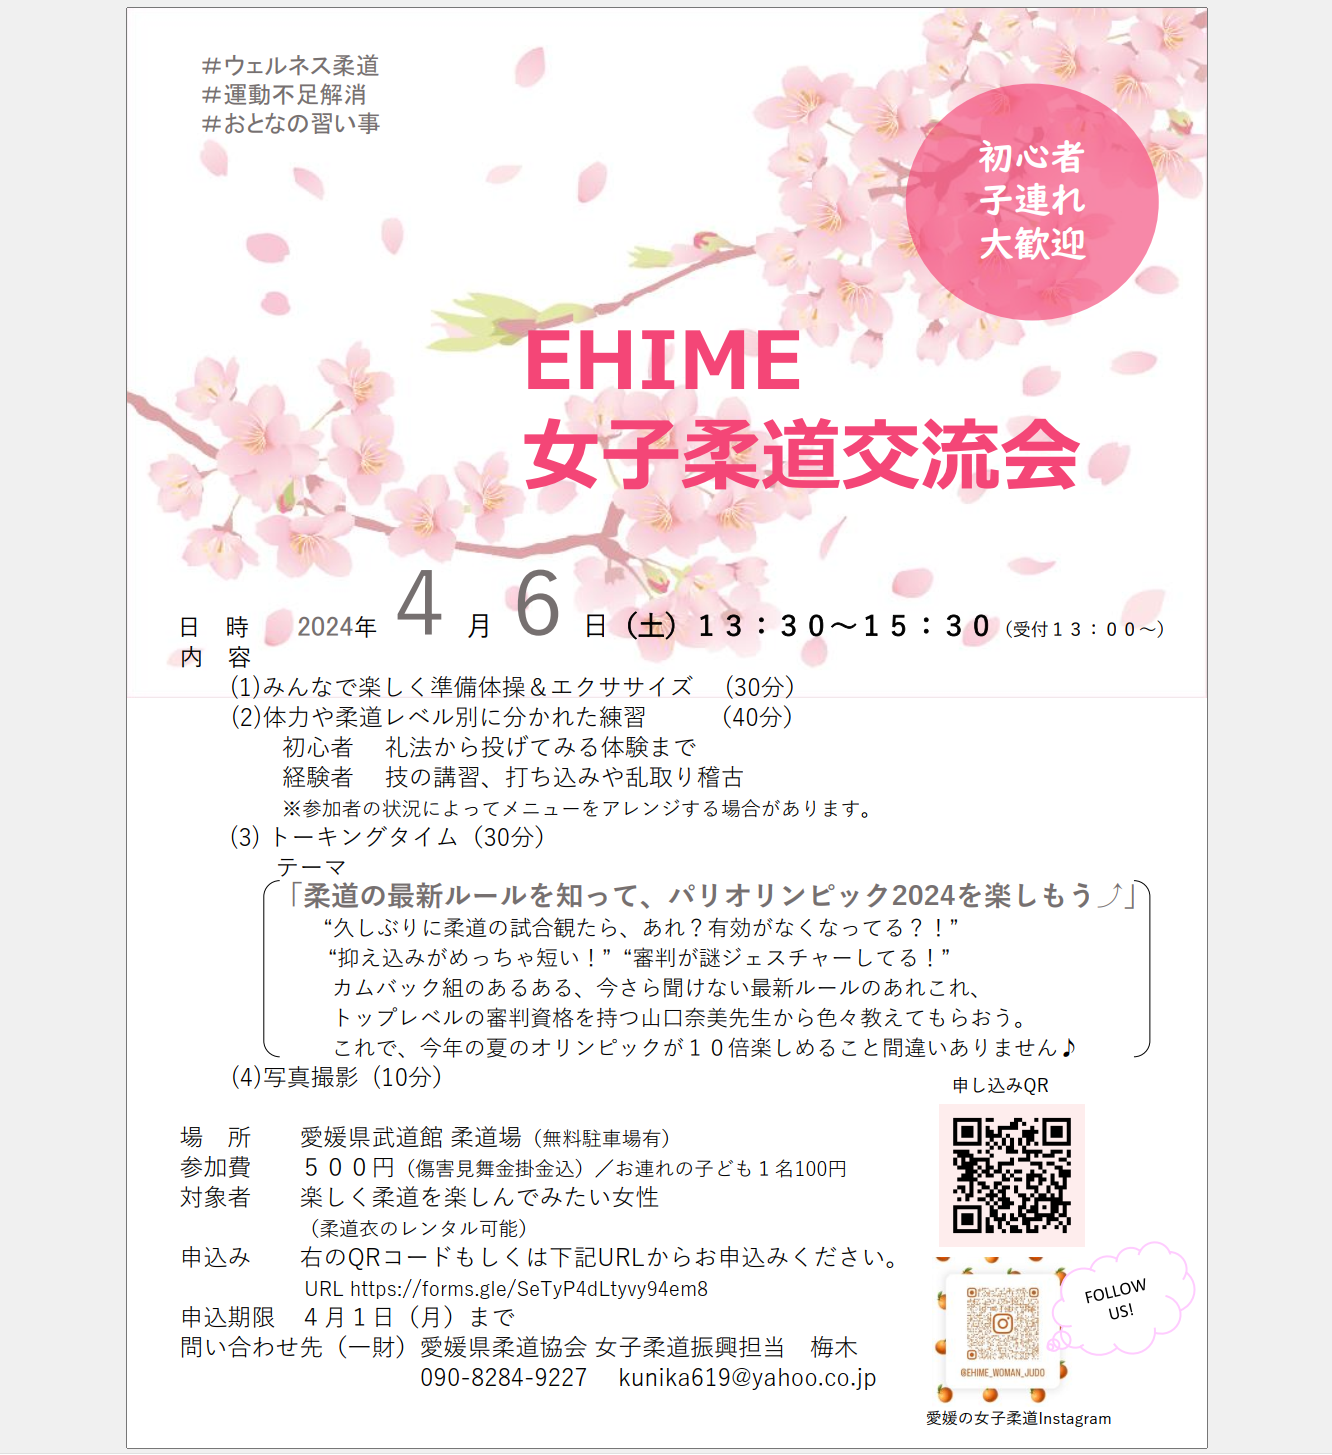 「「EHIME 女子柔道交流会」のご案内